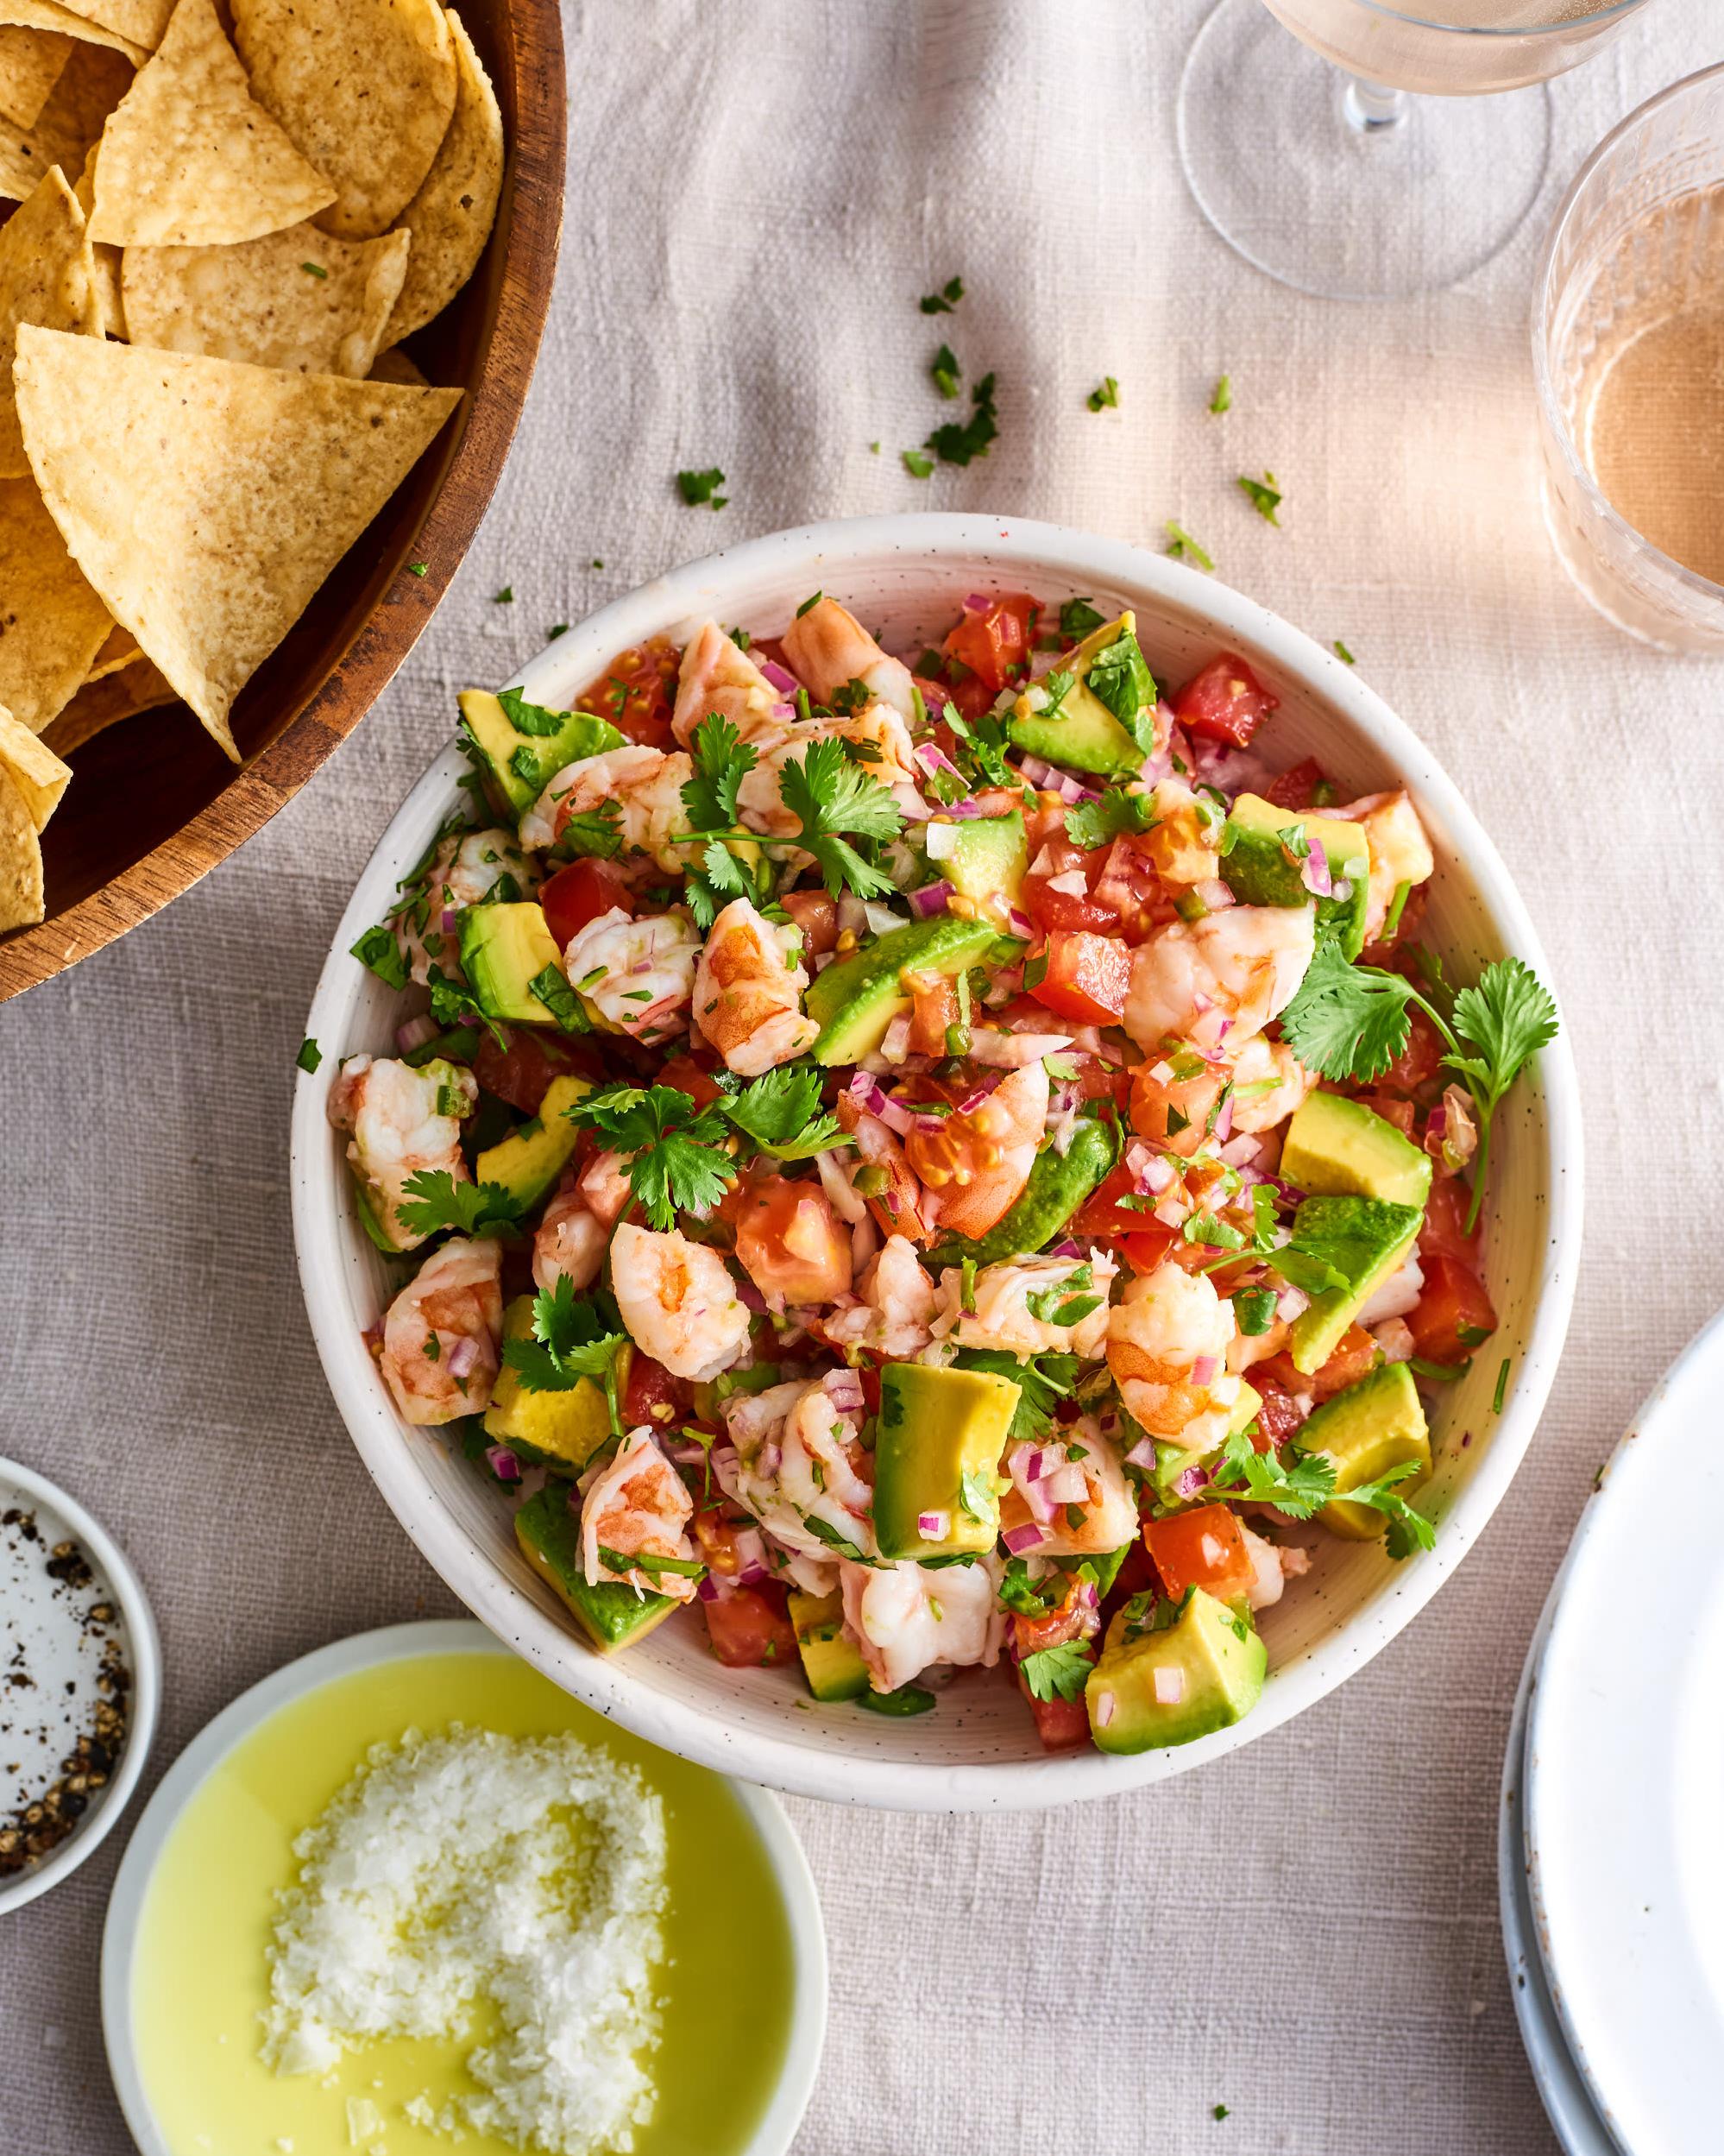  Fresh and bright ingredients come together in this refreshing and tangy shrimp ceviche.